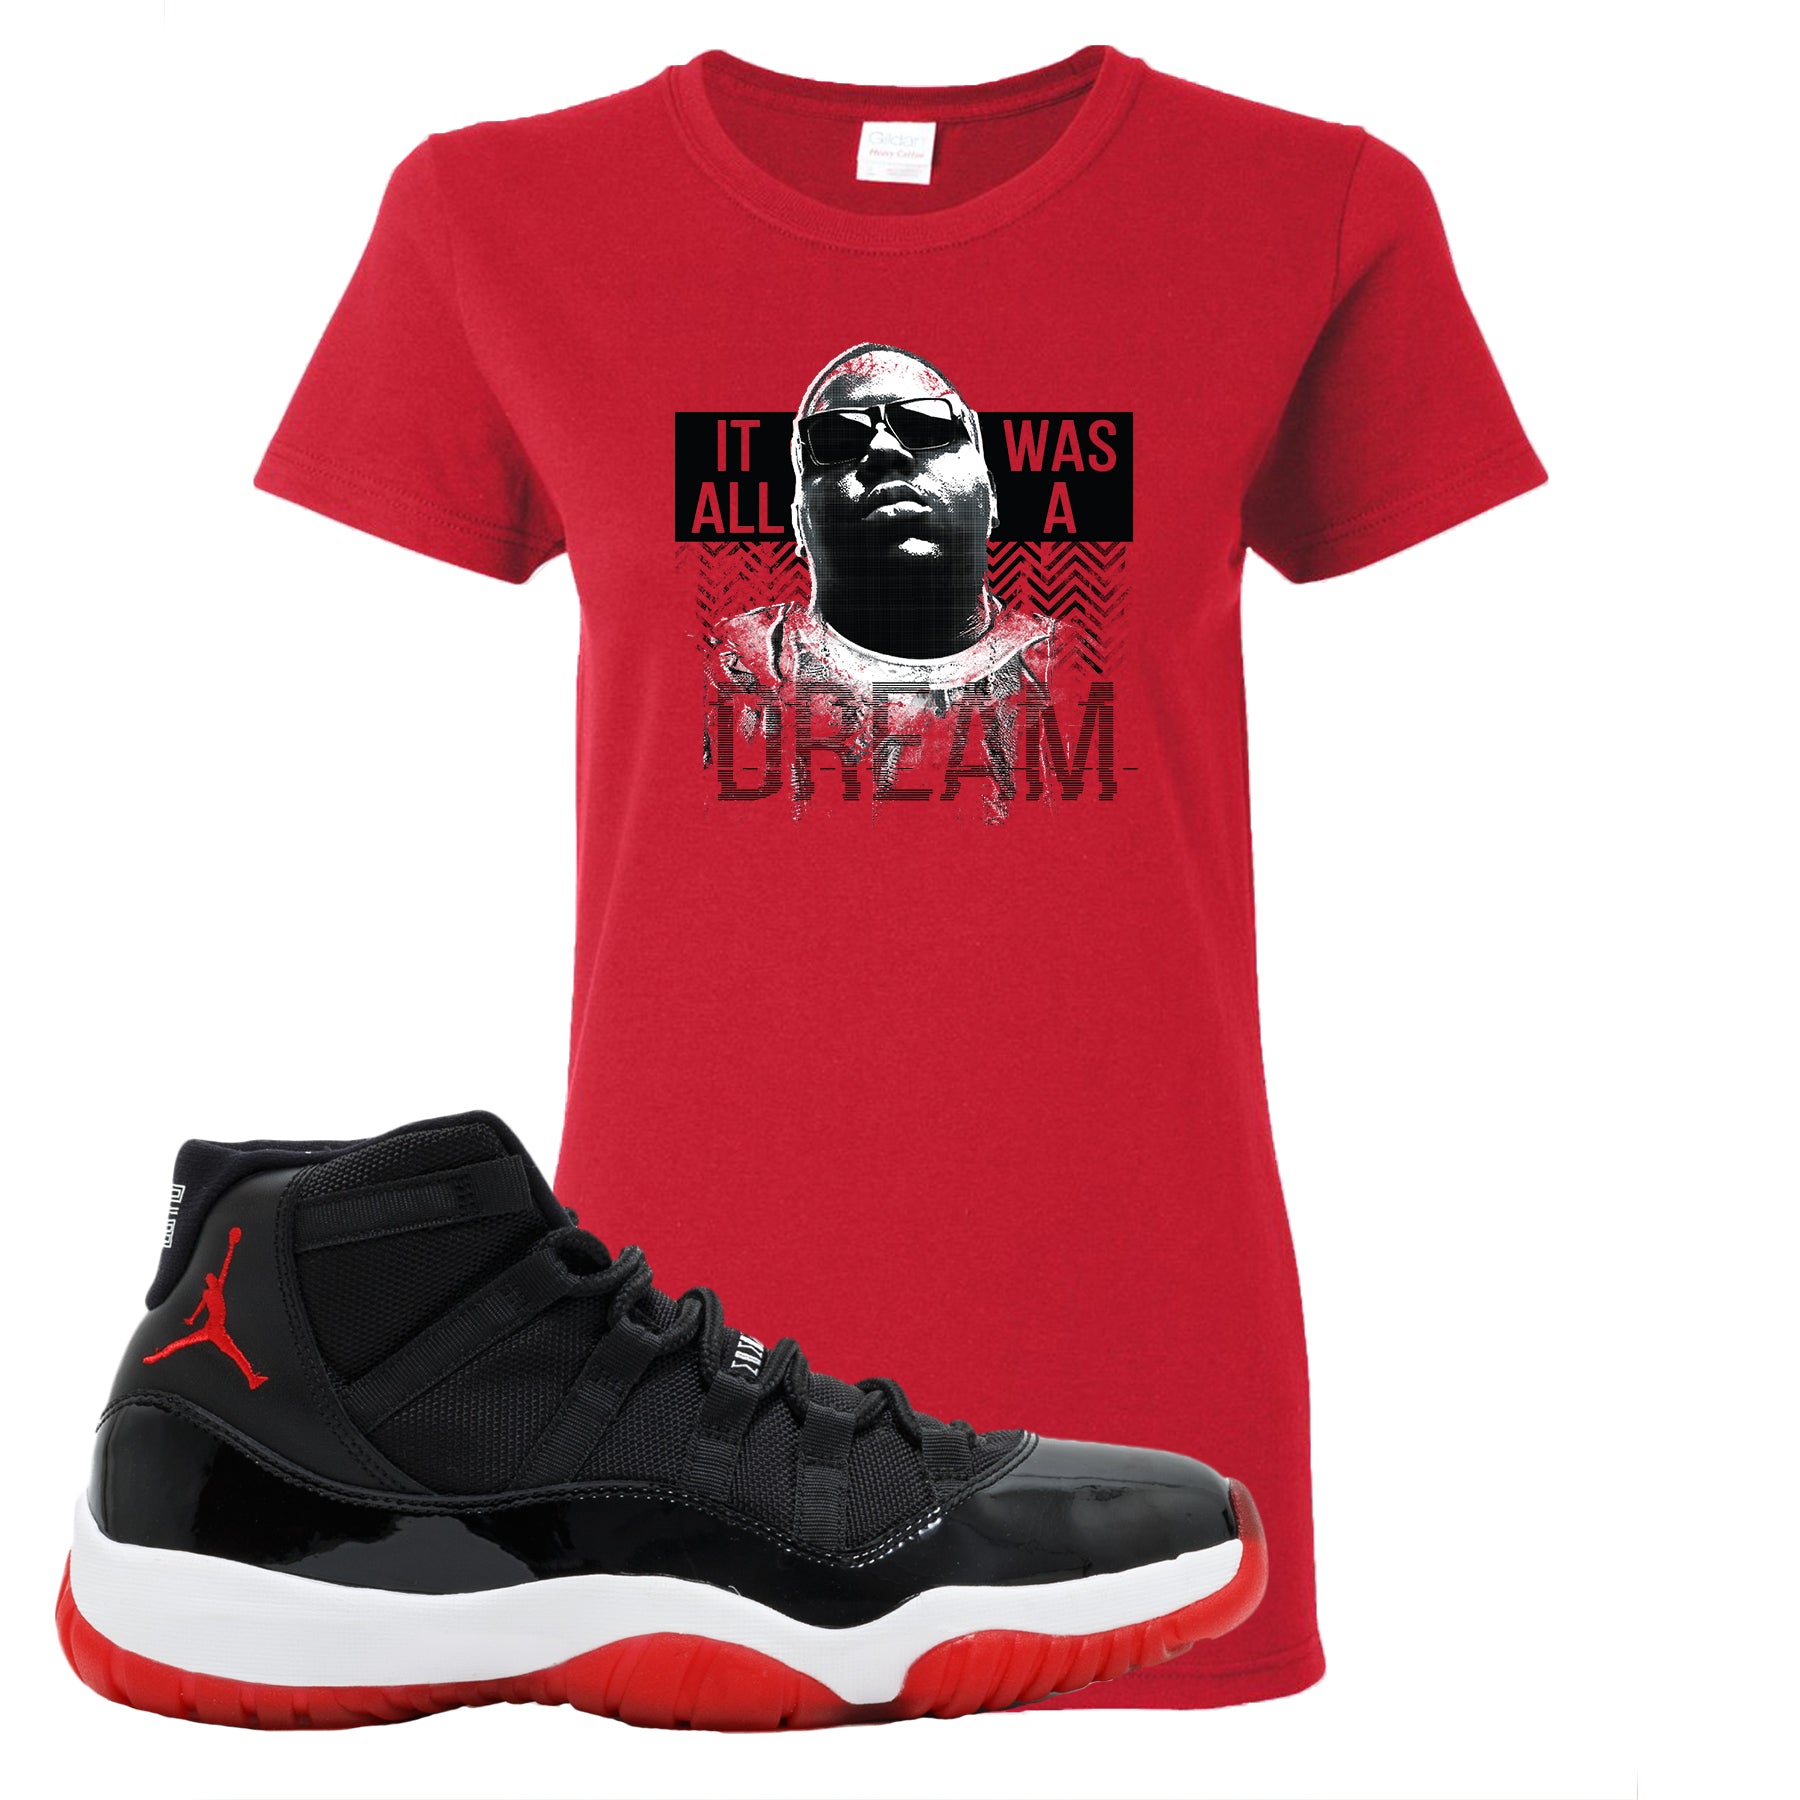 bred 11 clothing